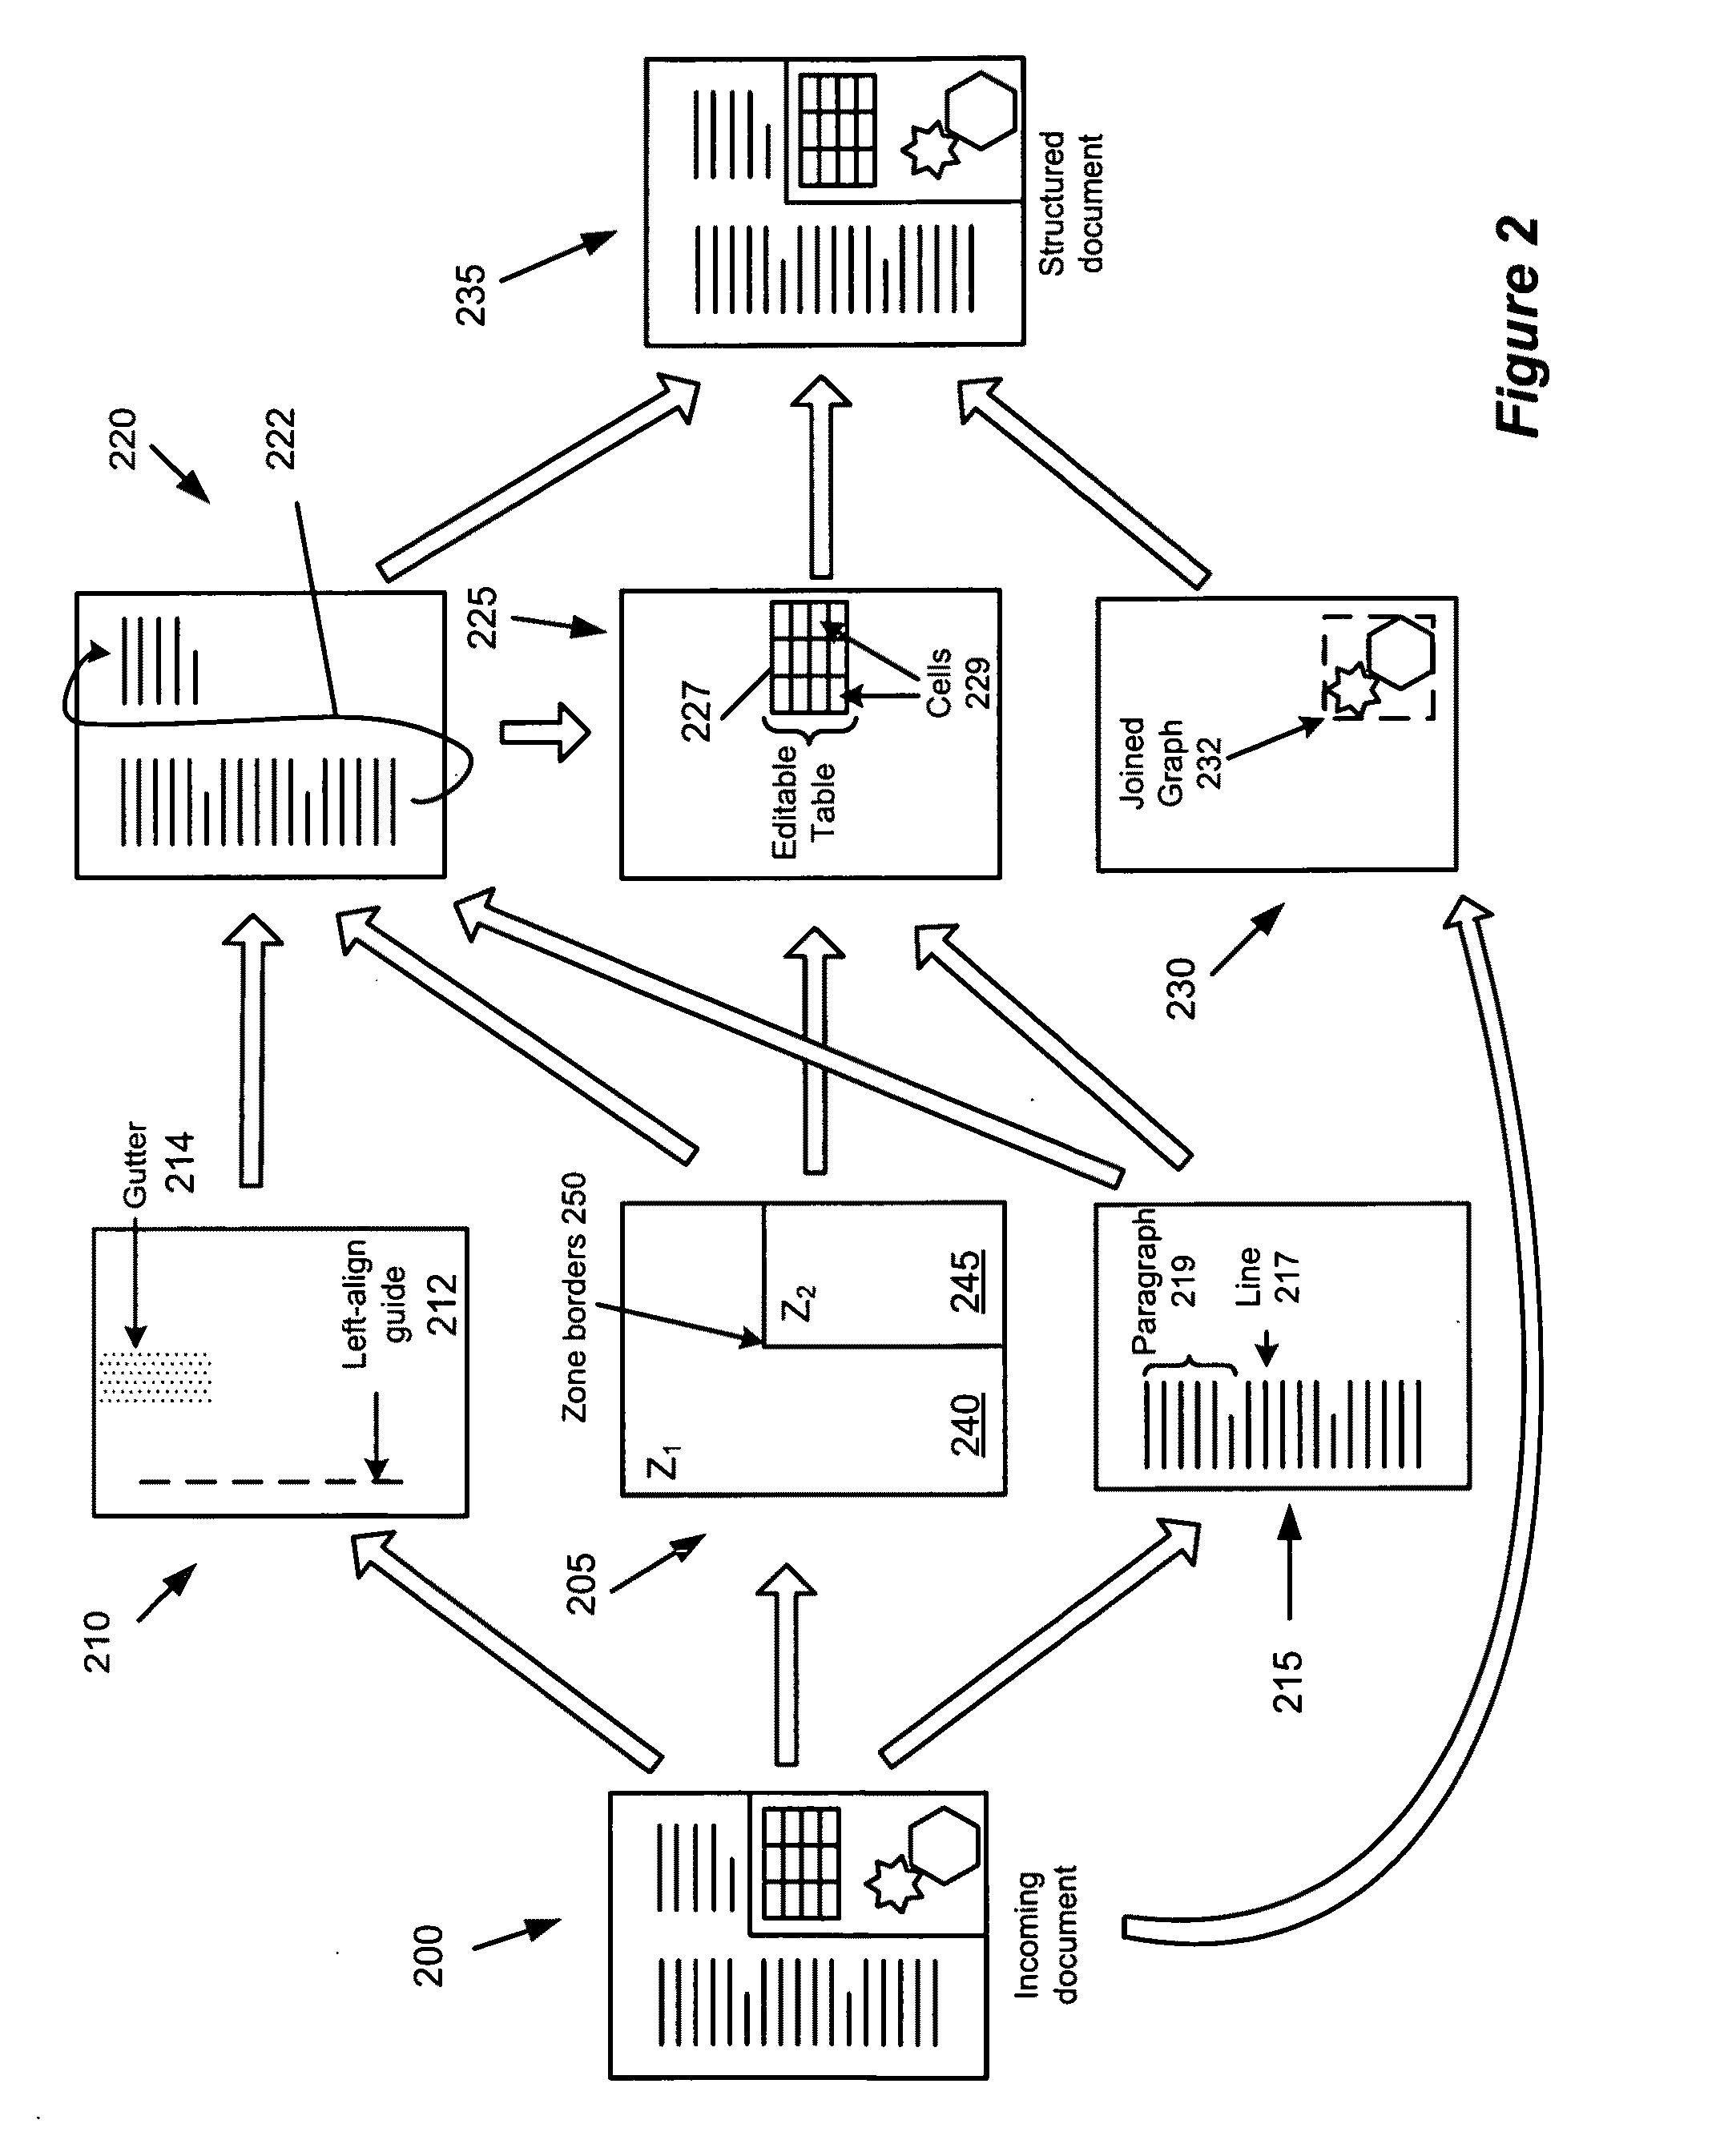 Identification of layout and content flow of an unstructured document